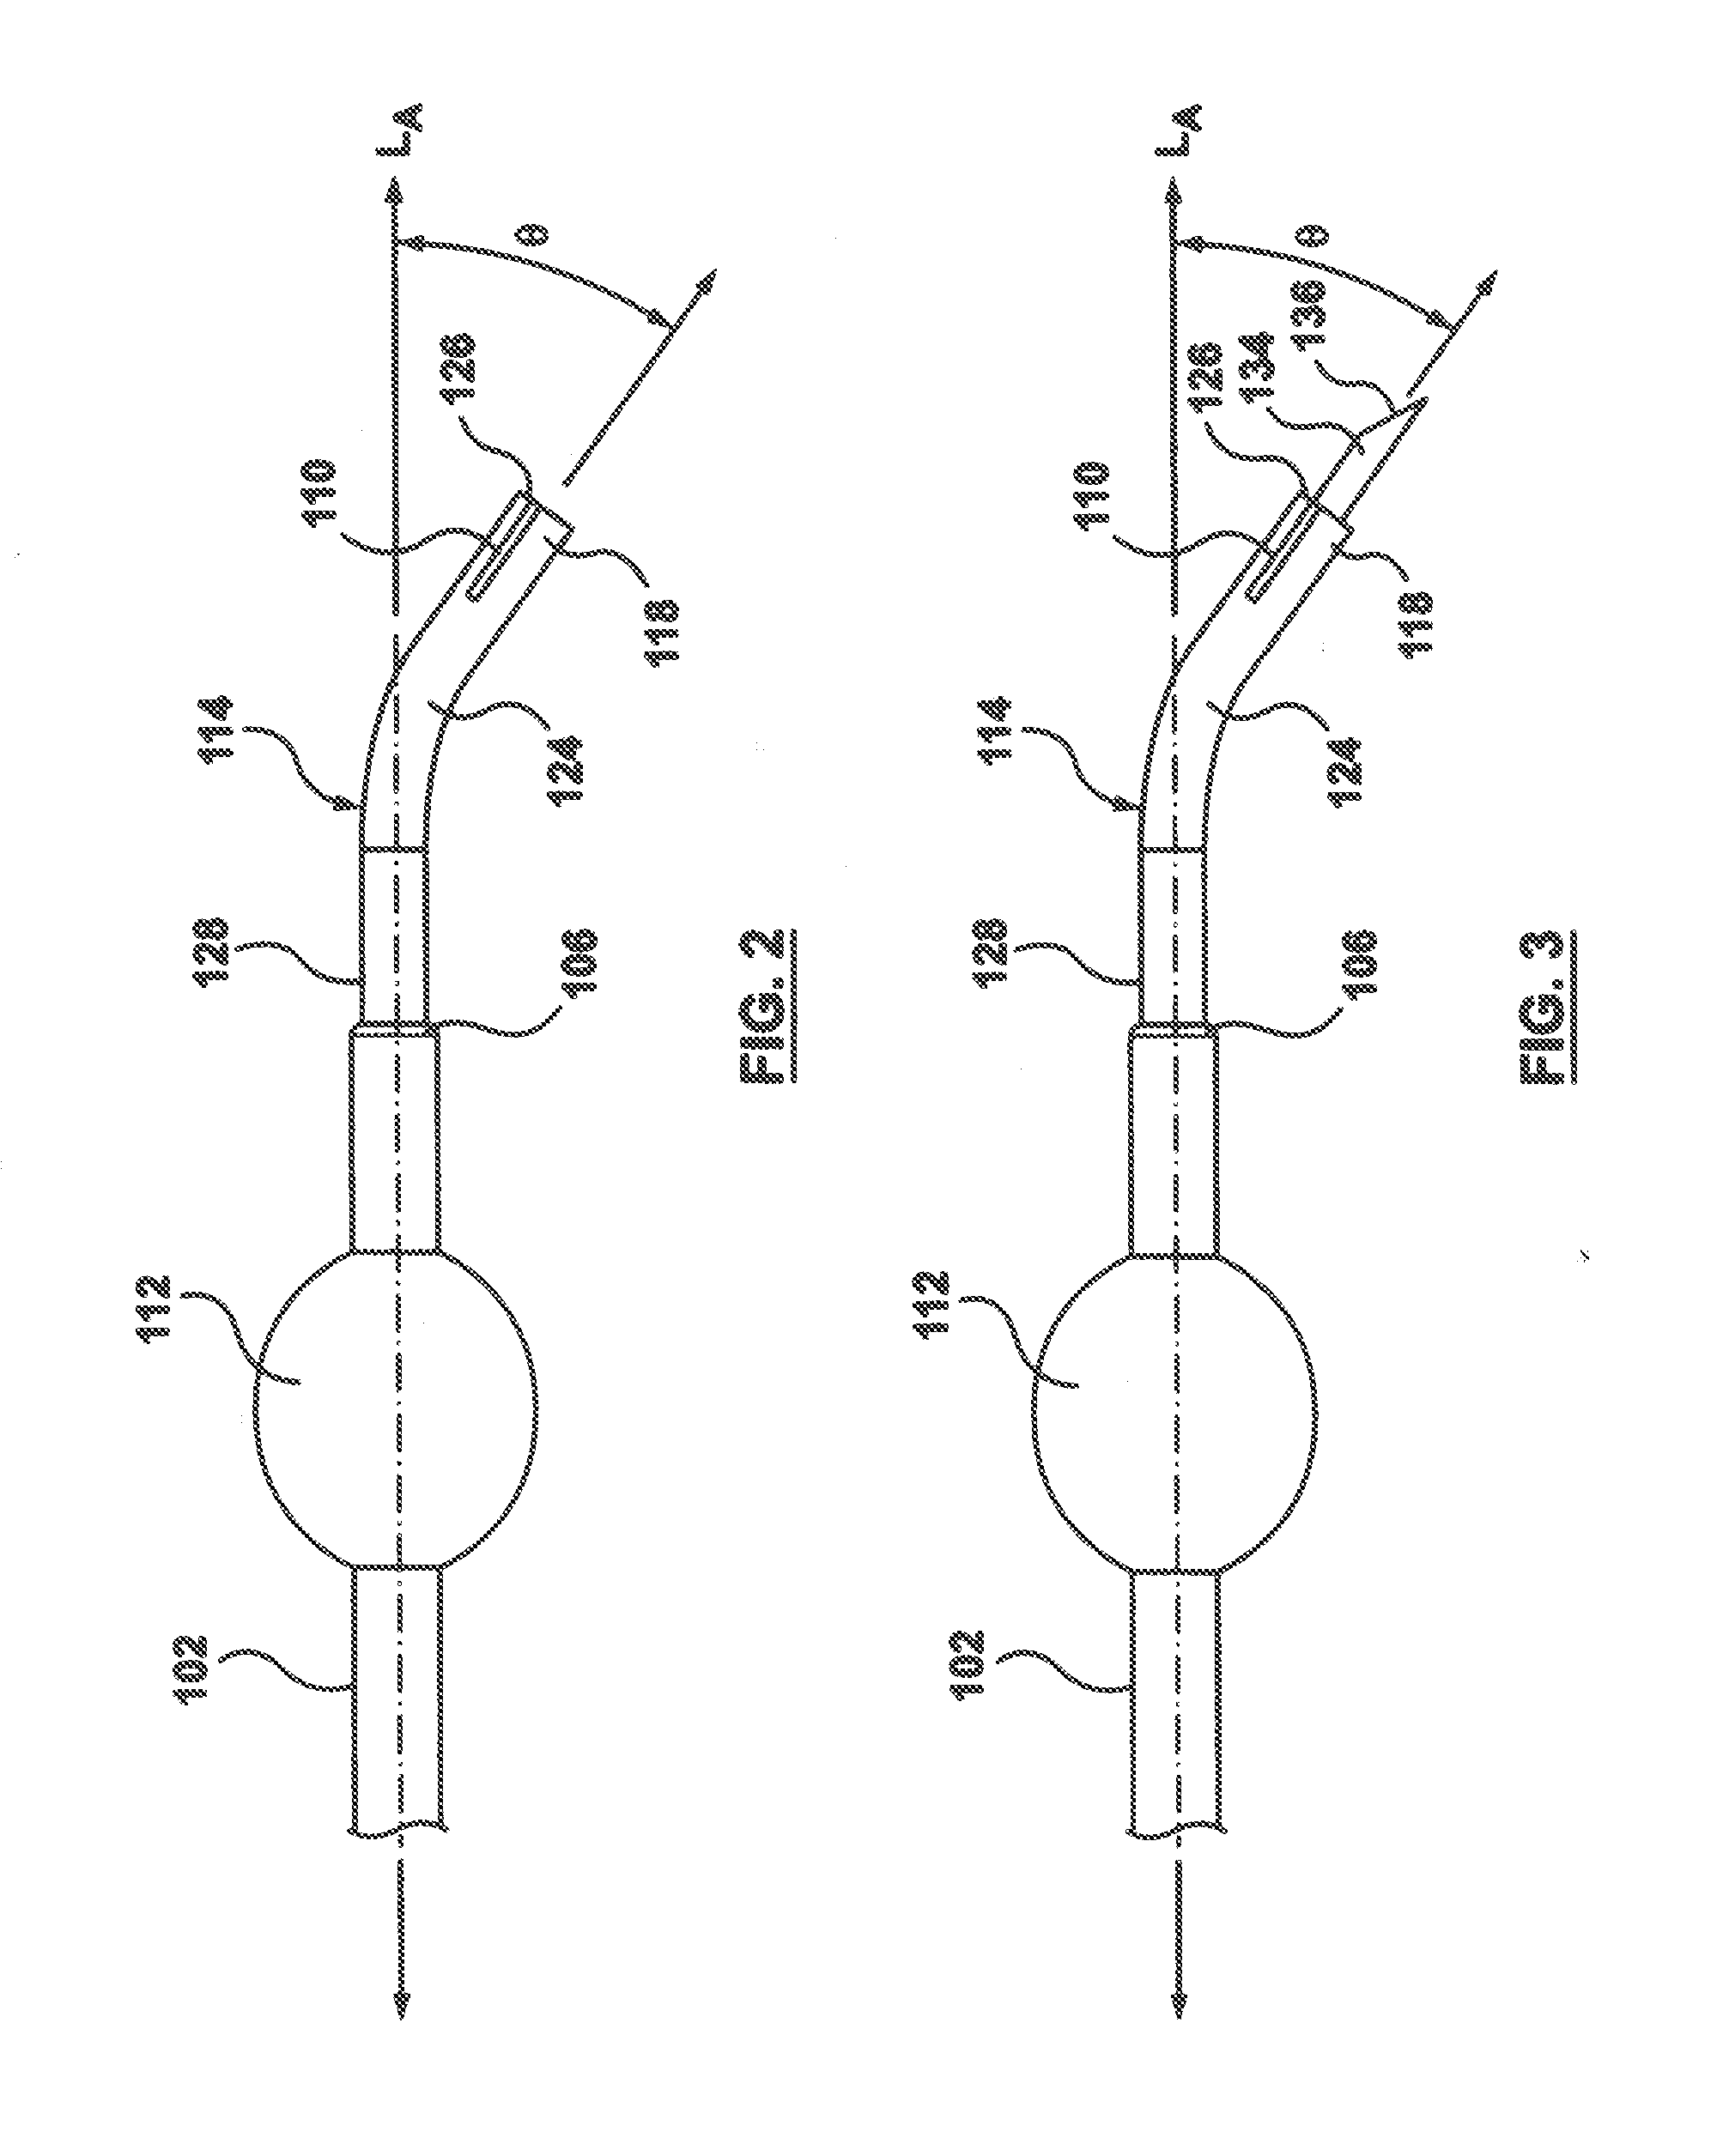 Occlusion Bypassing Apparatuses and Methods for Bypassing an Occlusion in a Blood Vessel